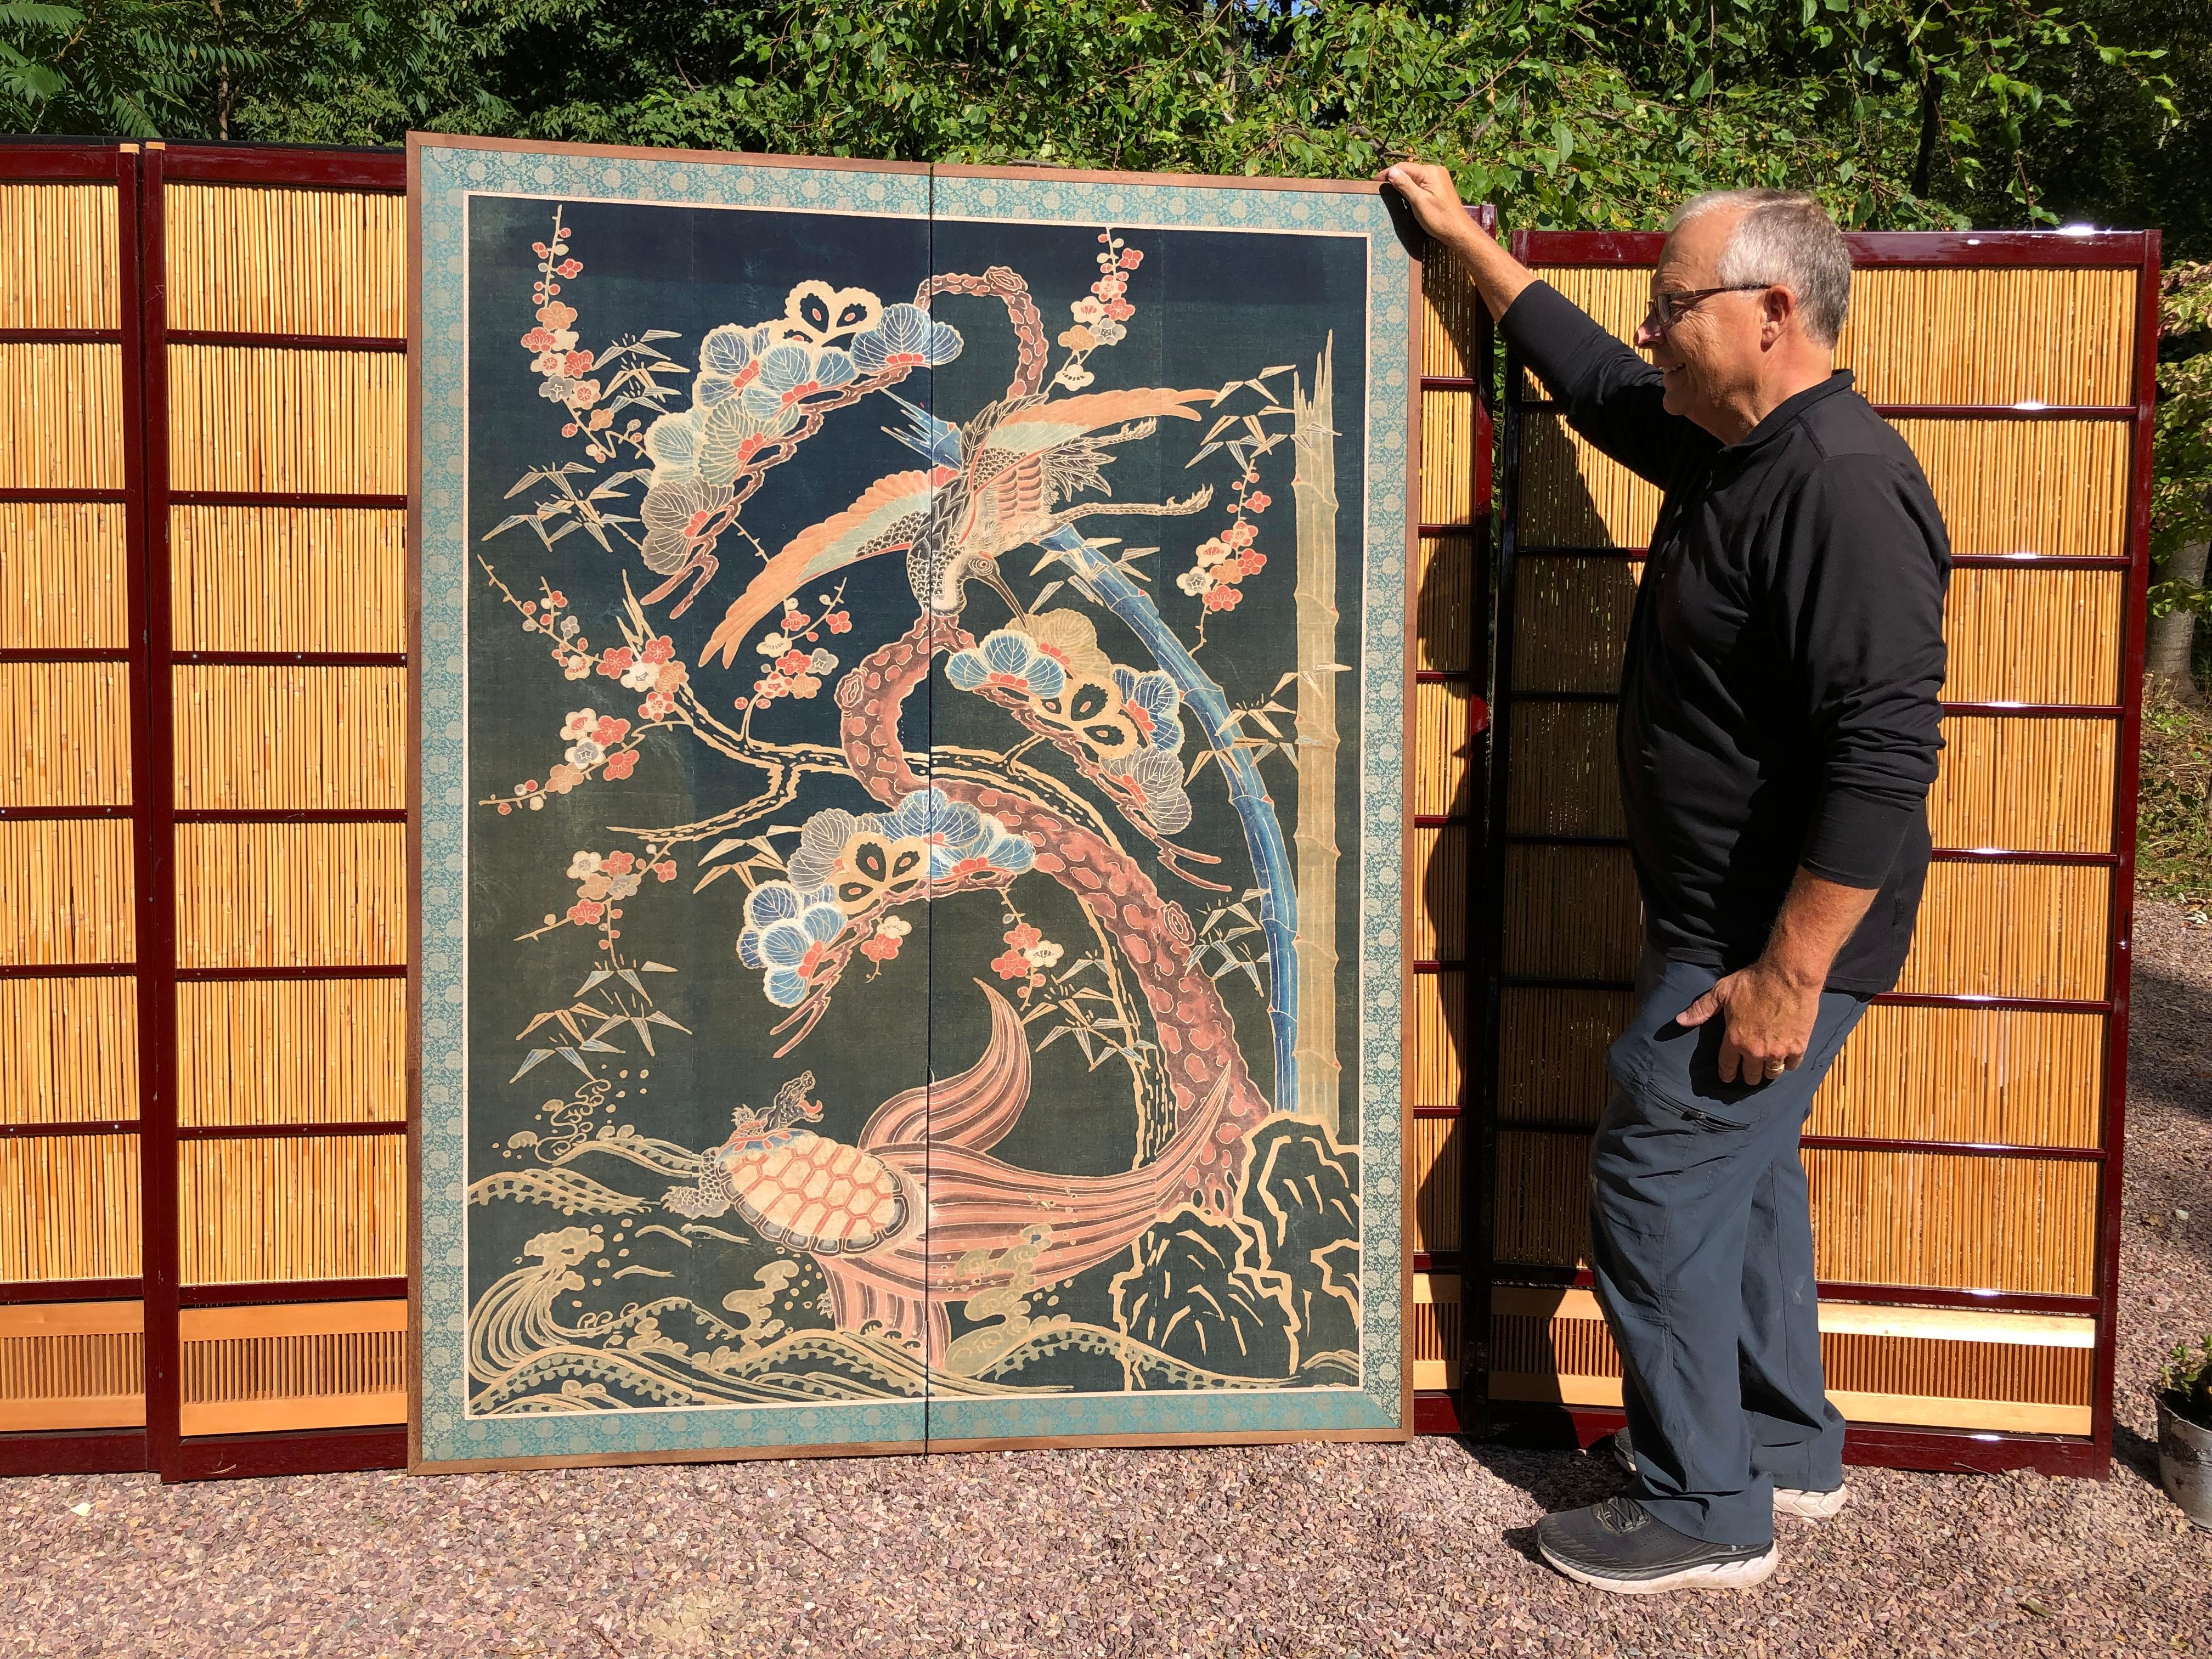 From our recent Japanese acquisitions travels- great wall art

A beautiful two panel screen created from a well-preserved futon cover tsutsugaki made of heavy cotton with the auspicious images of a large phoenix, turtle, sakura, scholar rocks, and